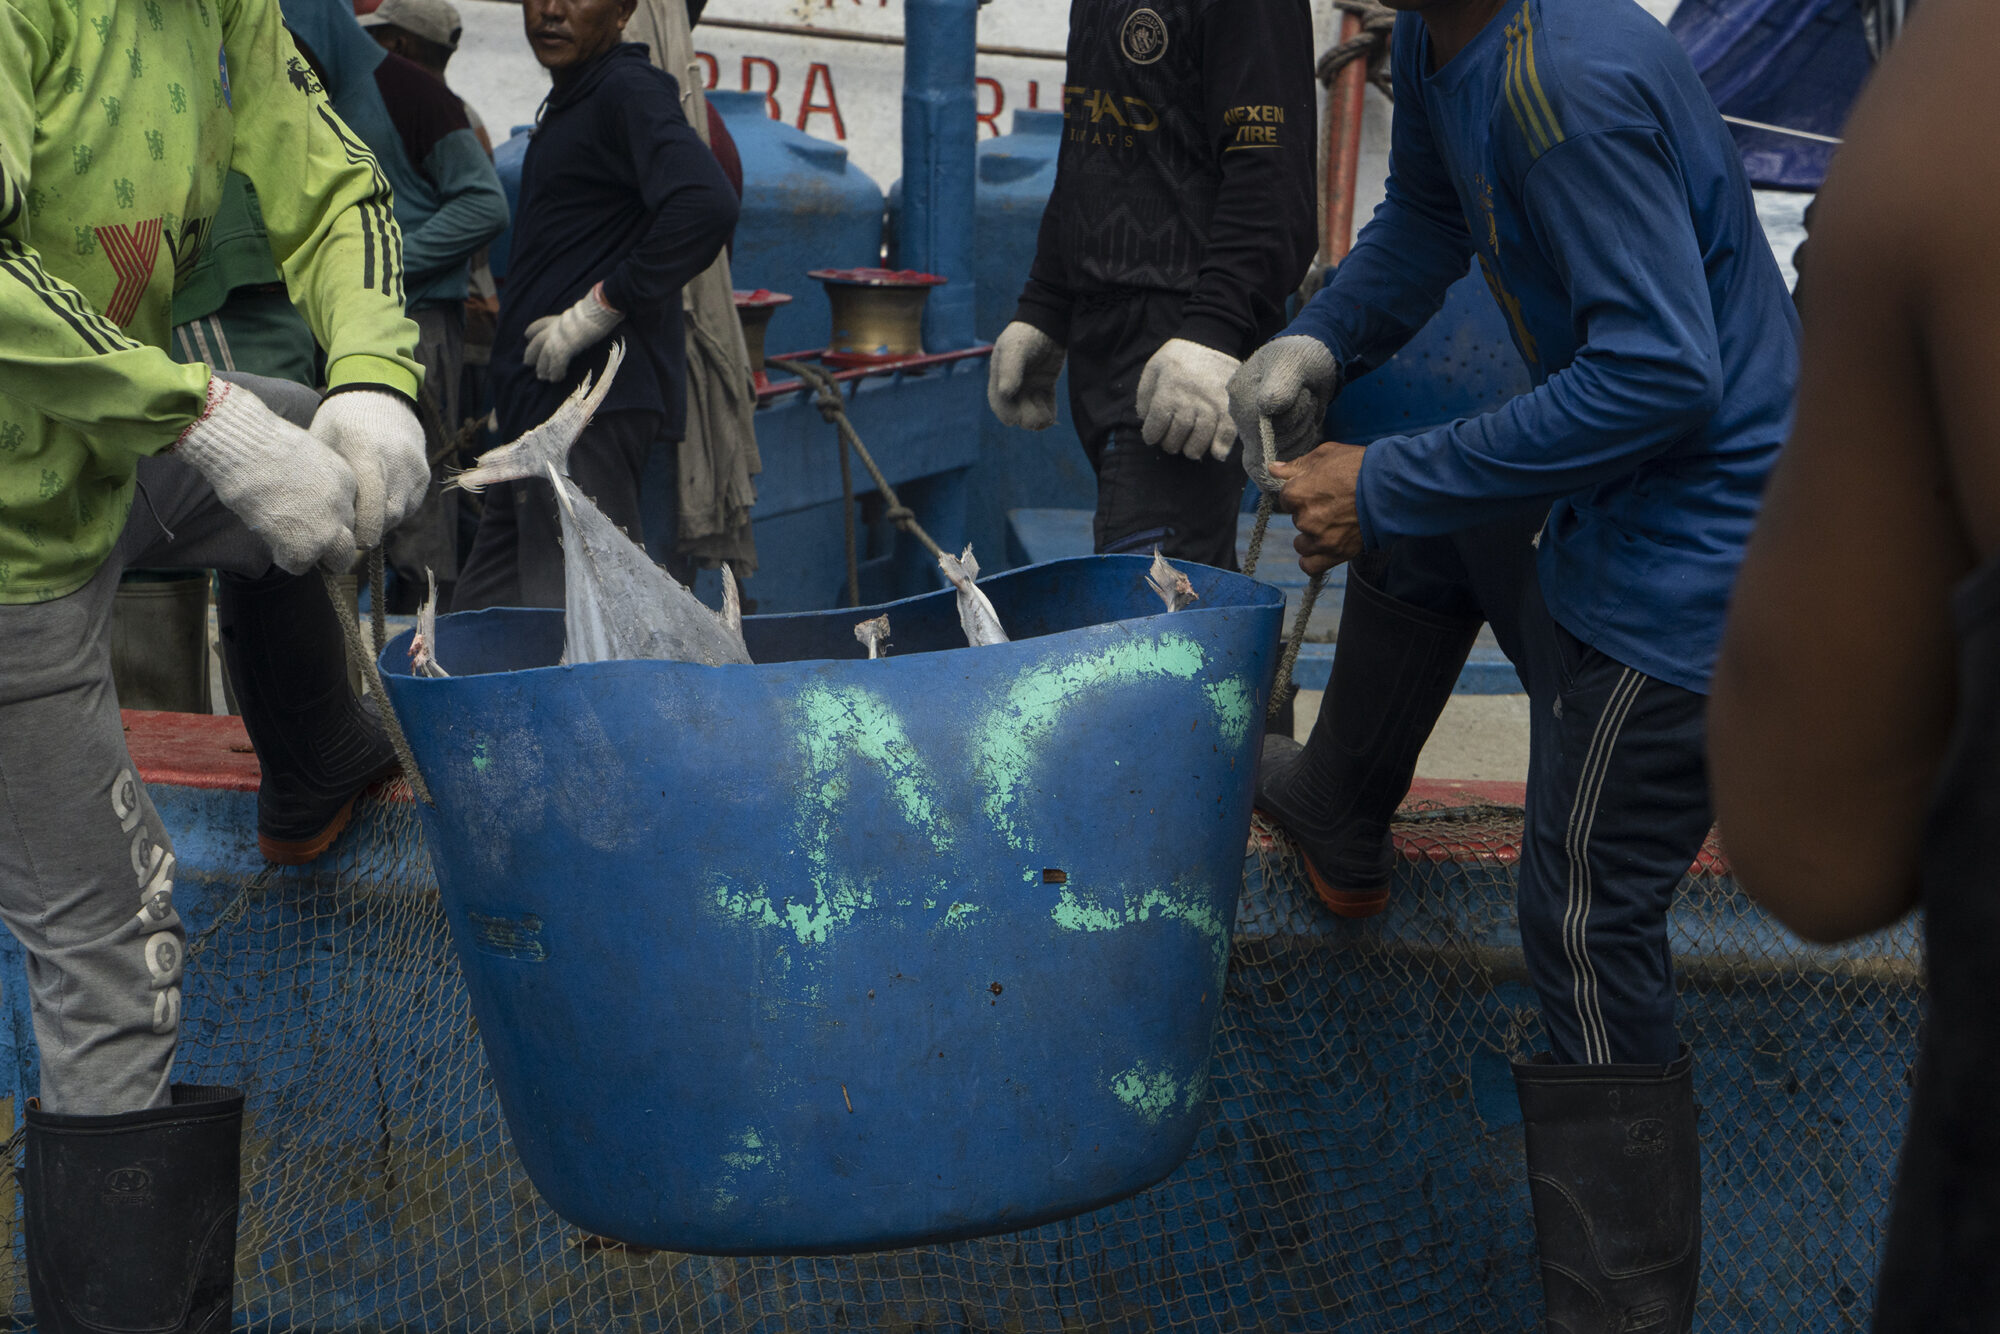 Workers on an industrial fishing vessel unload buckets of frozen skipjack tuna at the port of Benoa in Bali. Business licences are mandatory for vessels like this to operate in Indonesian waters